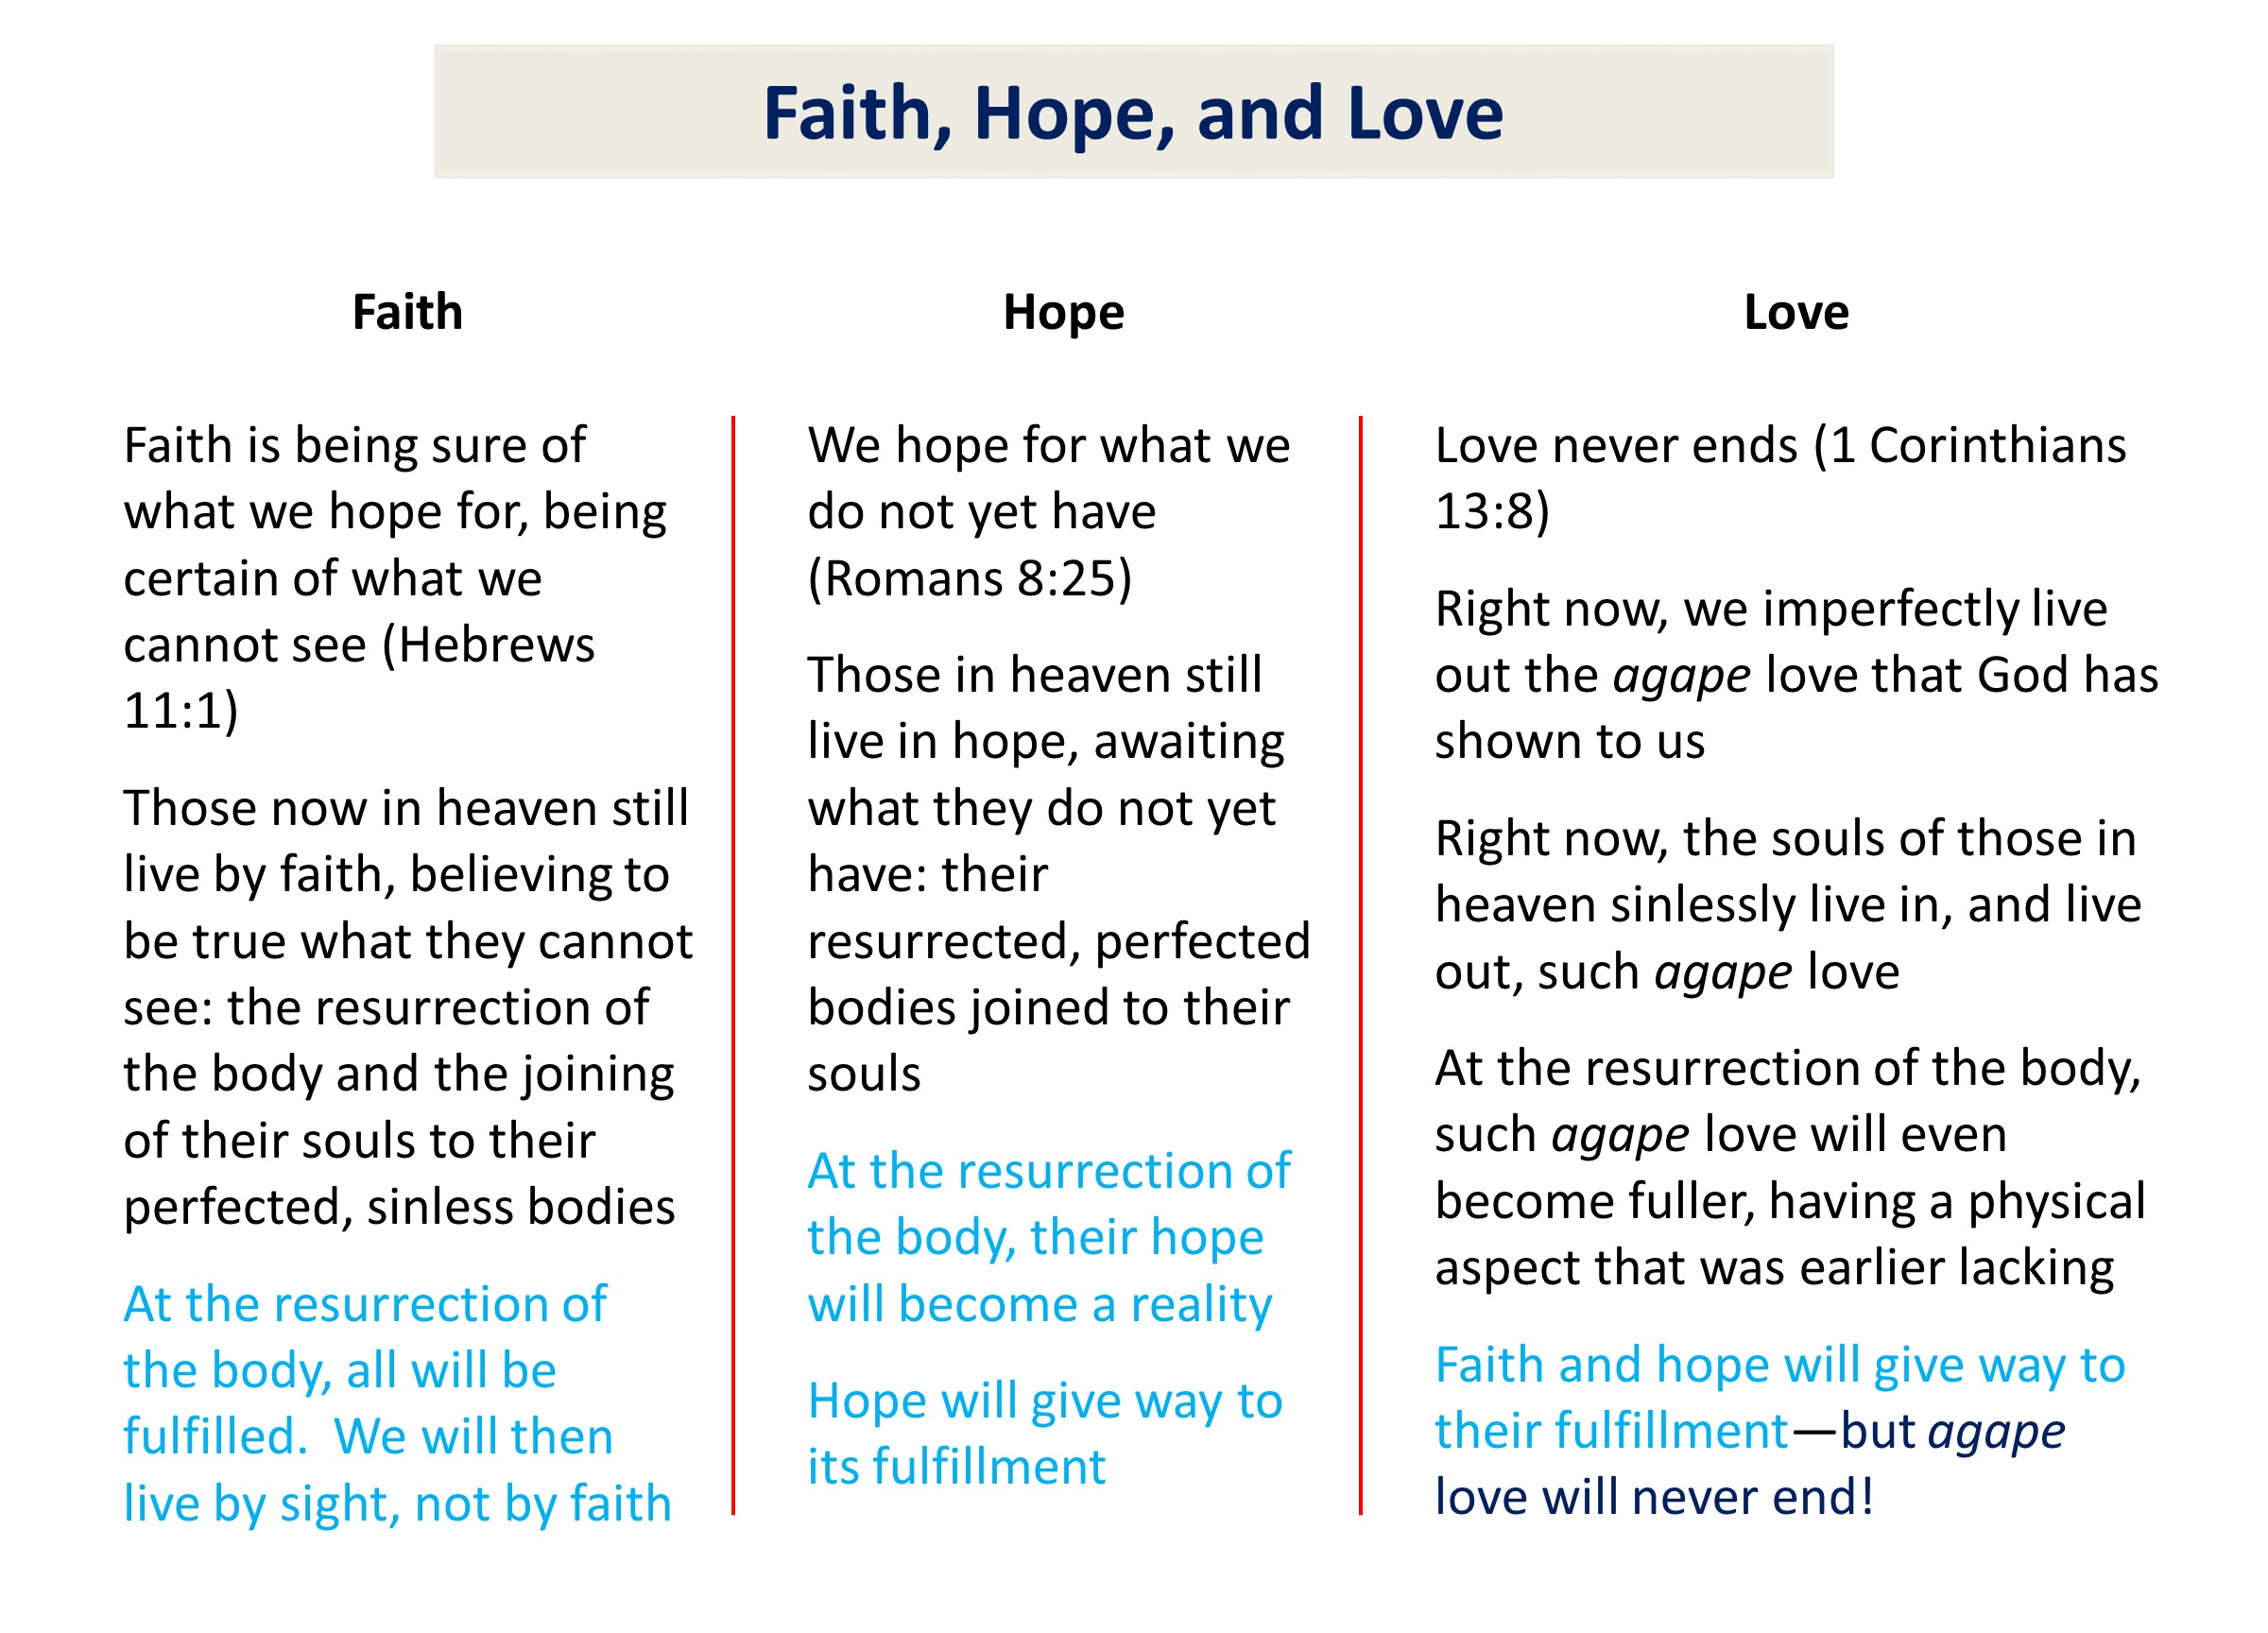 ask gramps hope faith difference